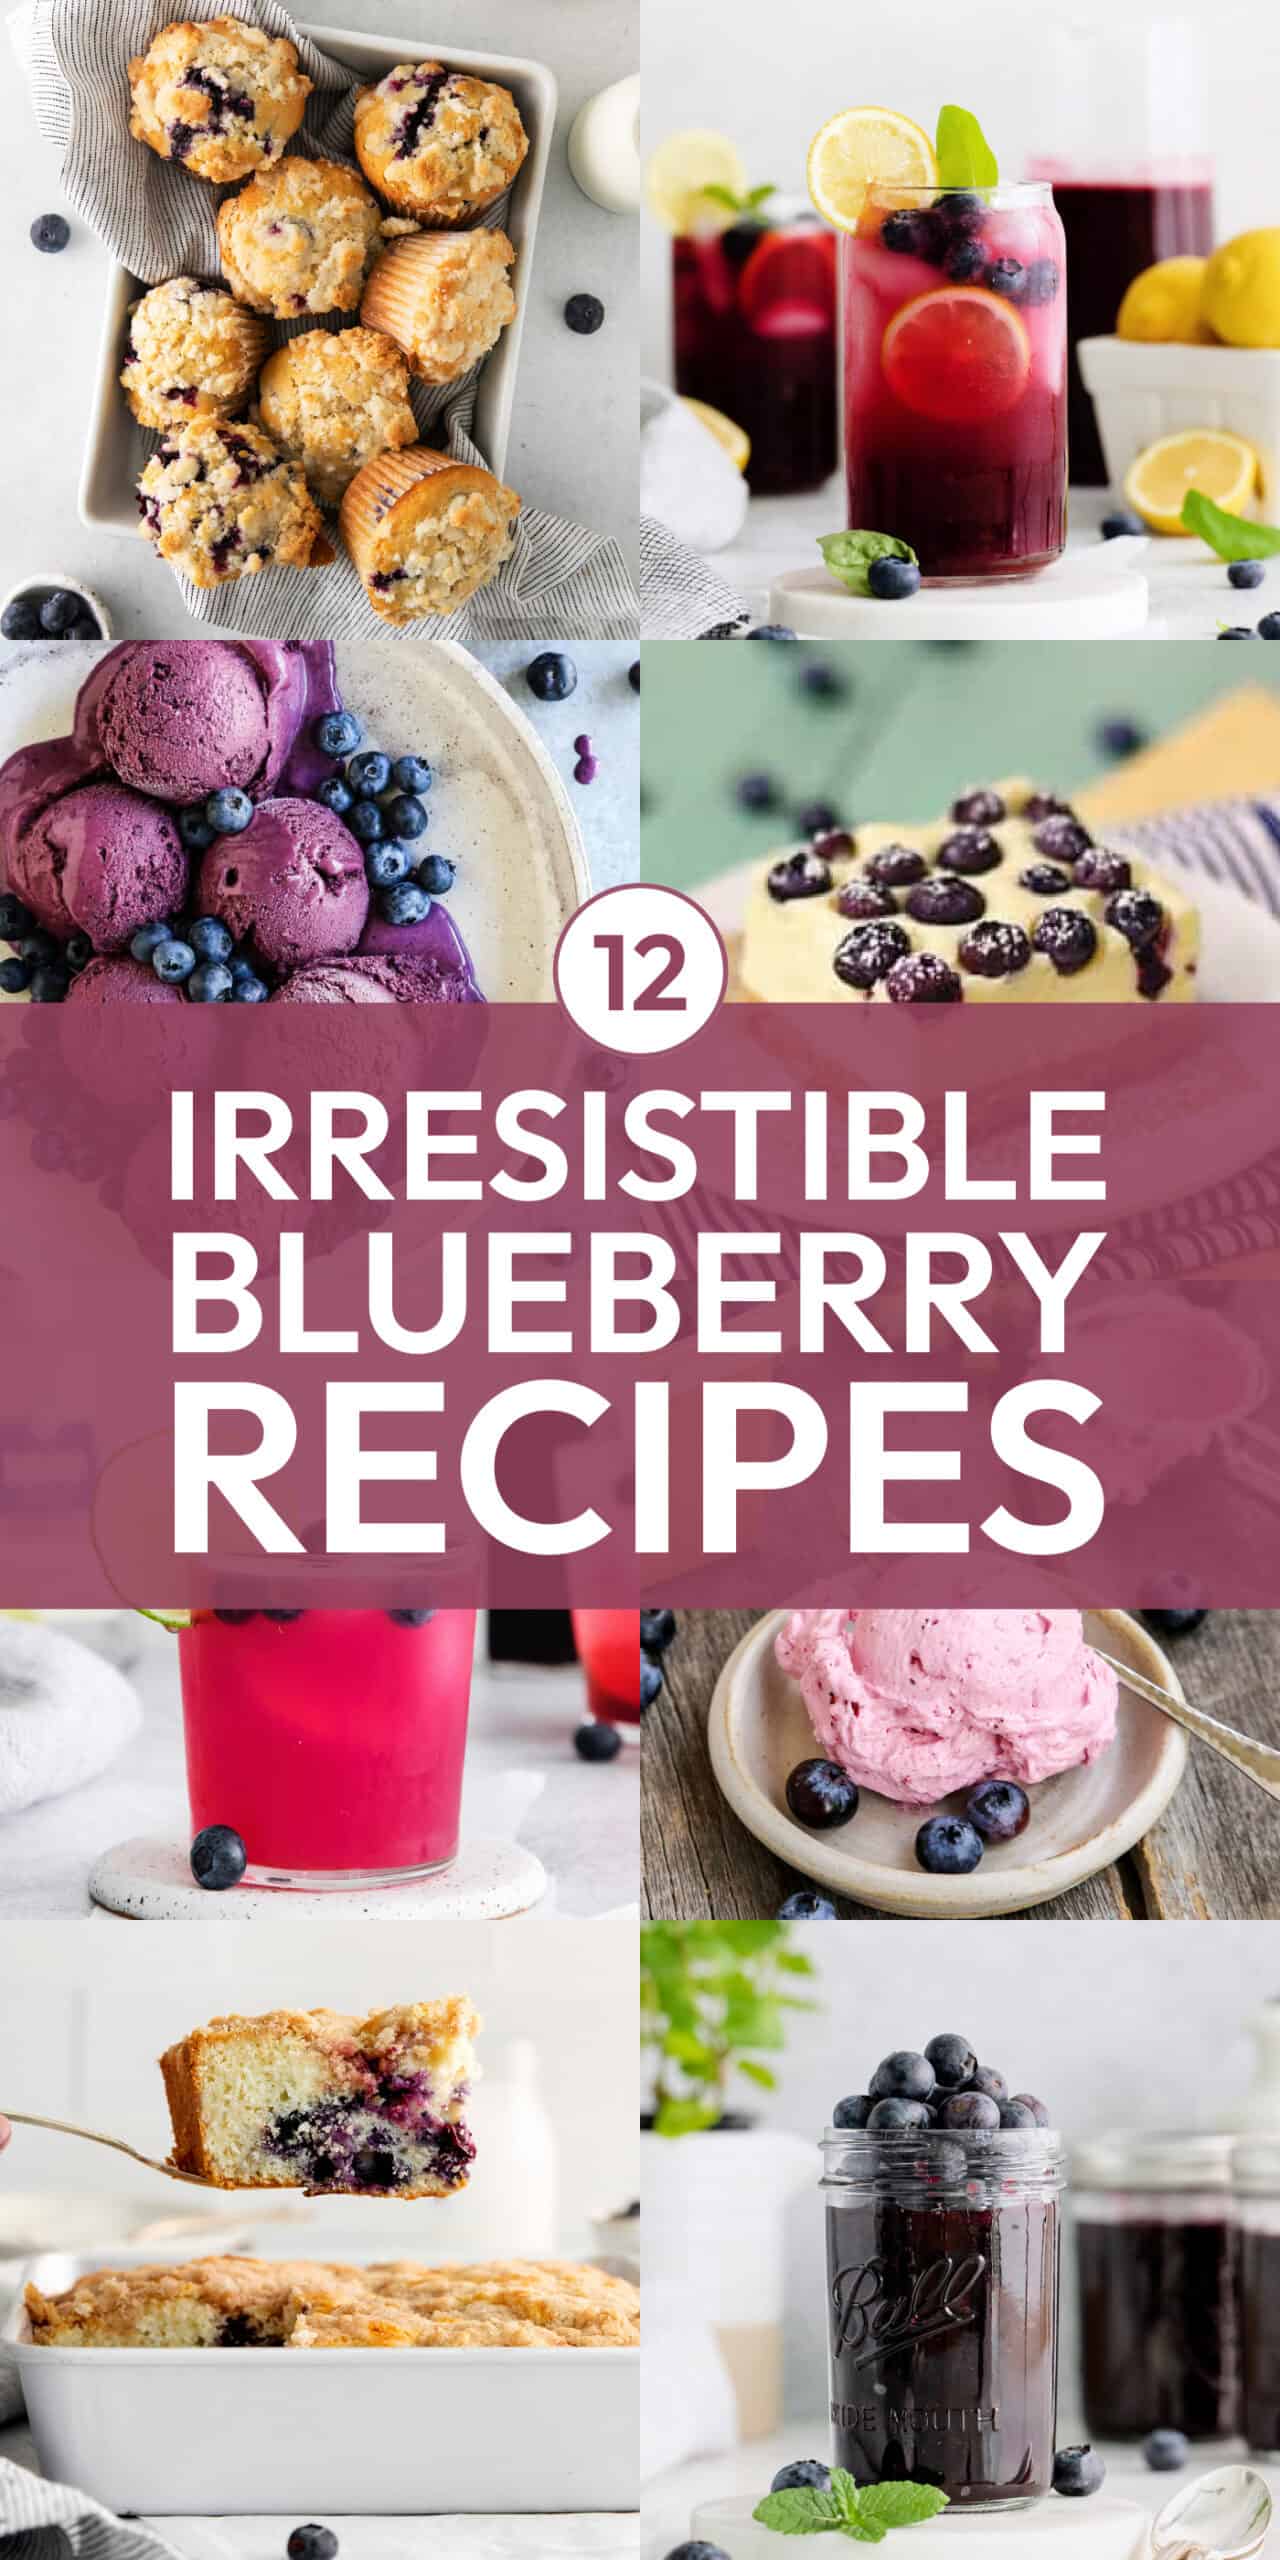 Pinterest image for 12 irresistible blueberry recipes